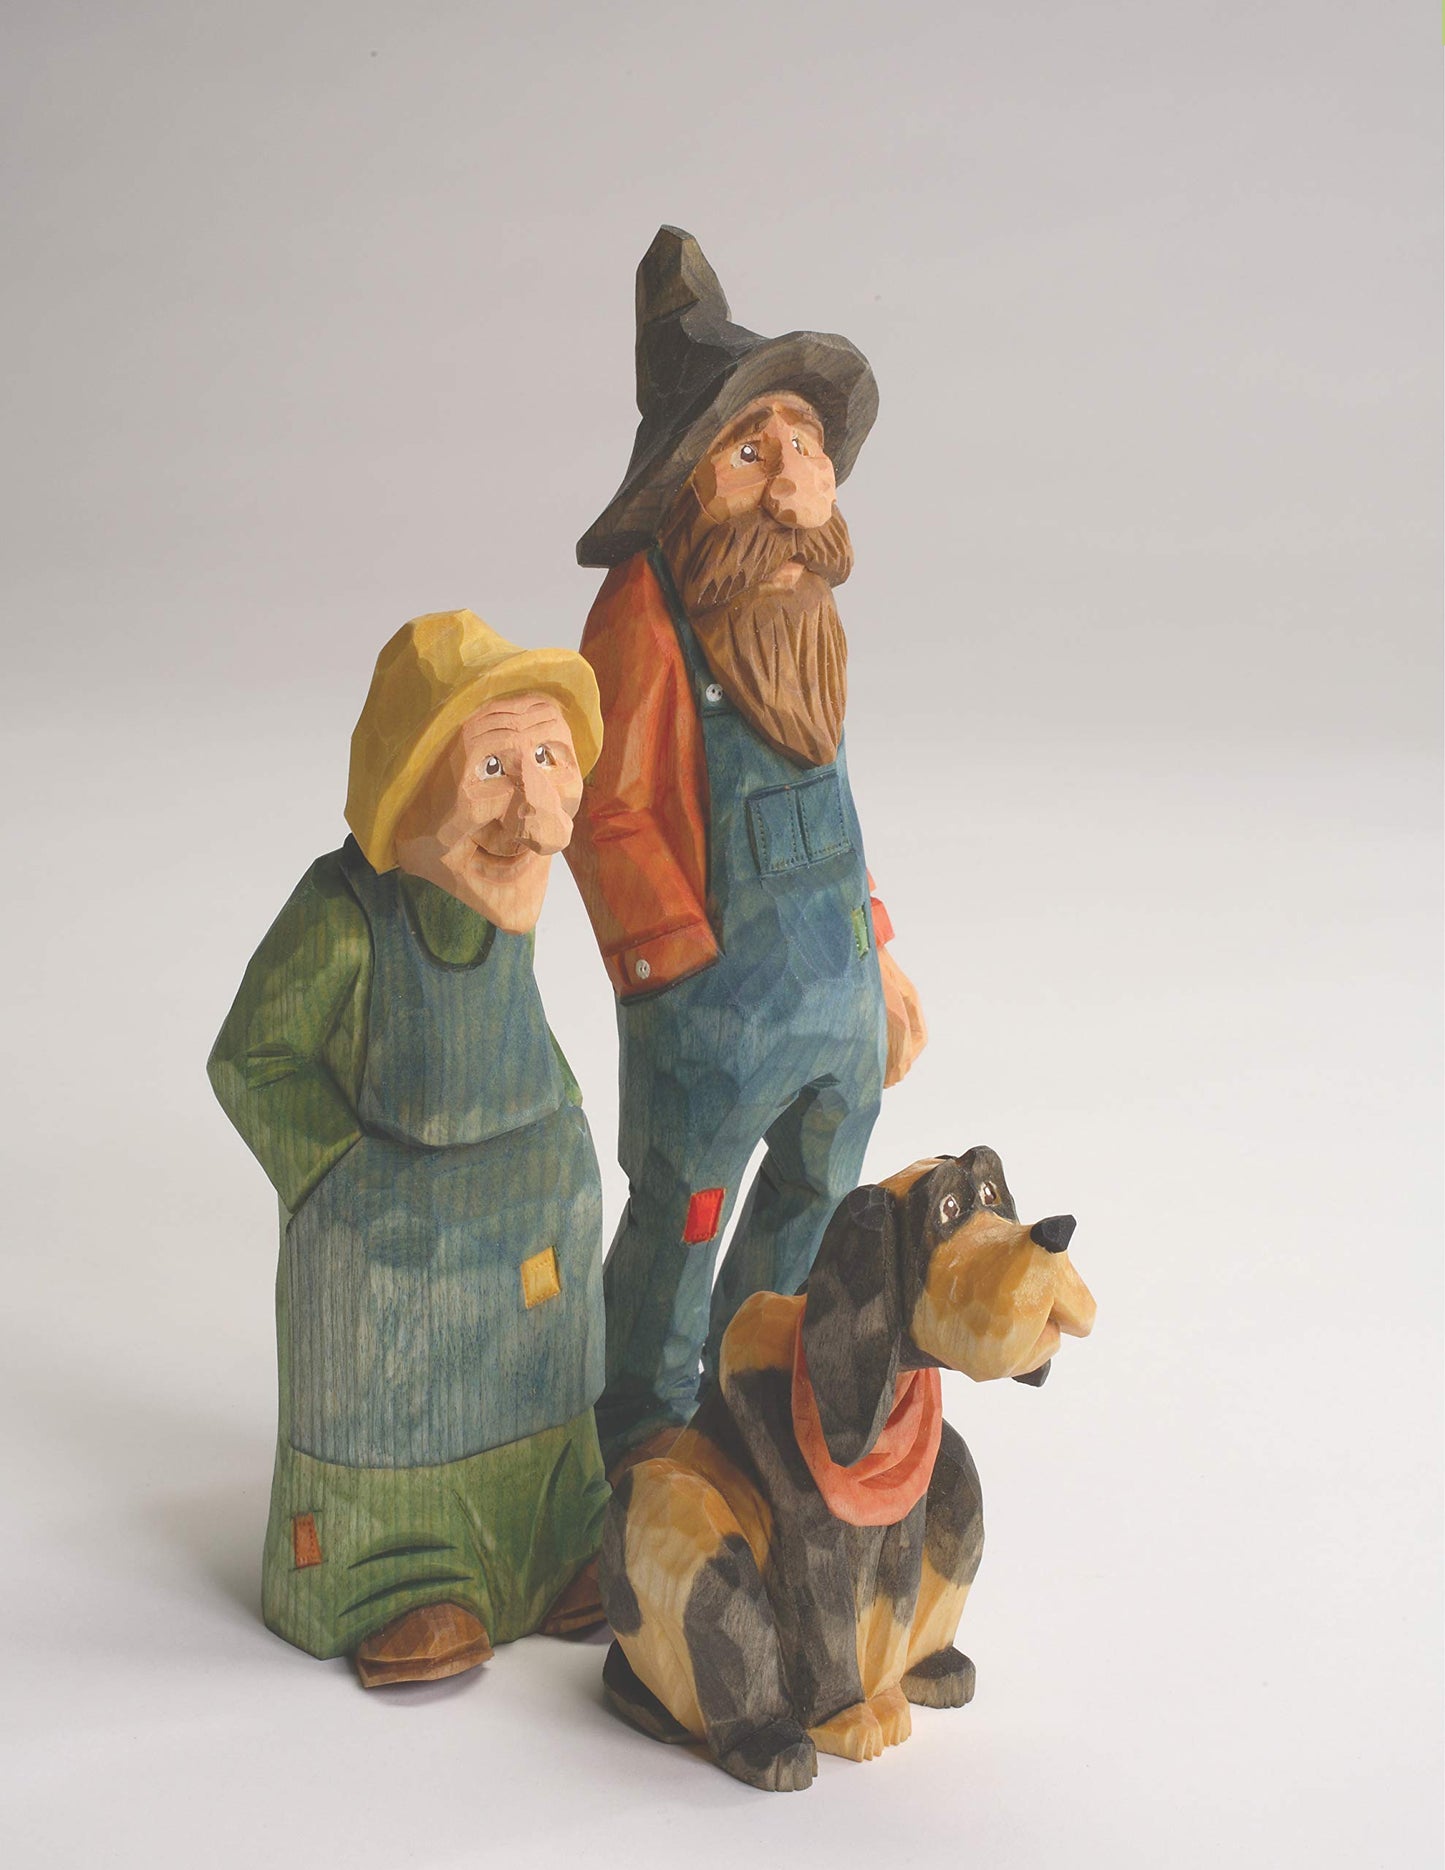 Whittling Country Folk, Revised Edition: 12 Caricature Projects with Personality (Fox Chapel Publishing) Woodcarving, Painting, and Staining